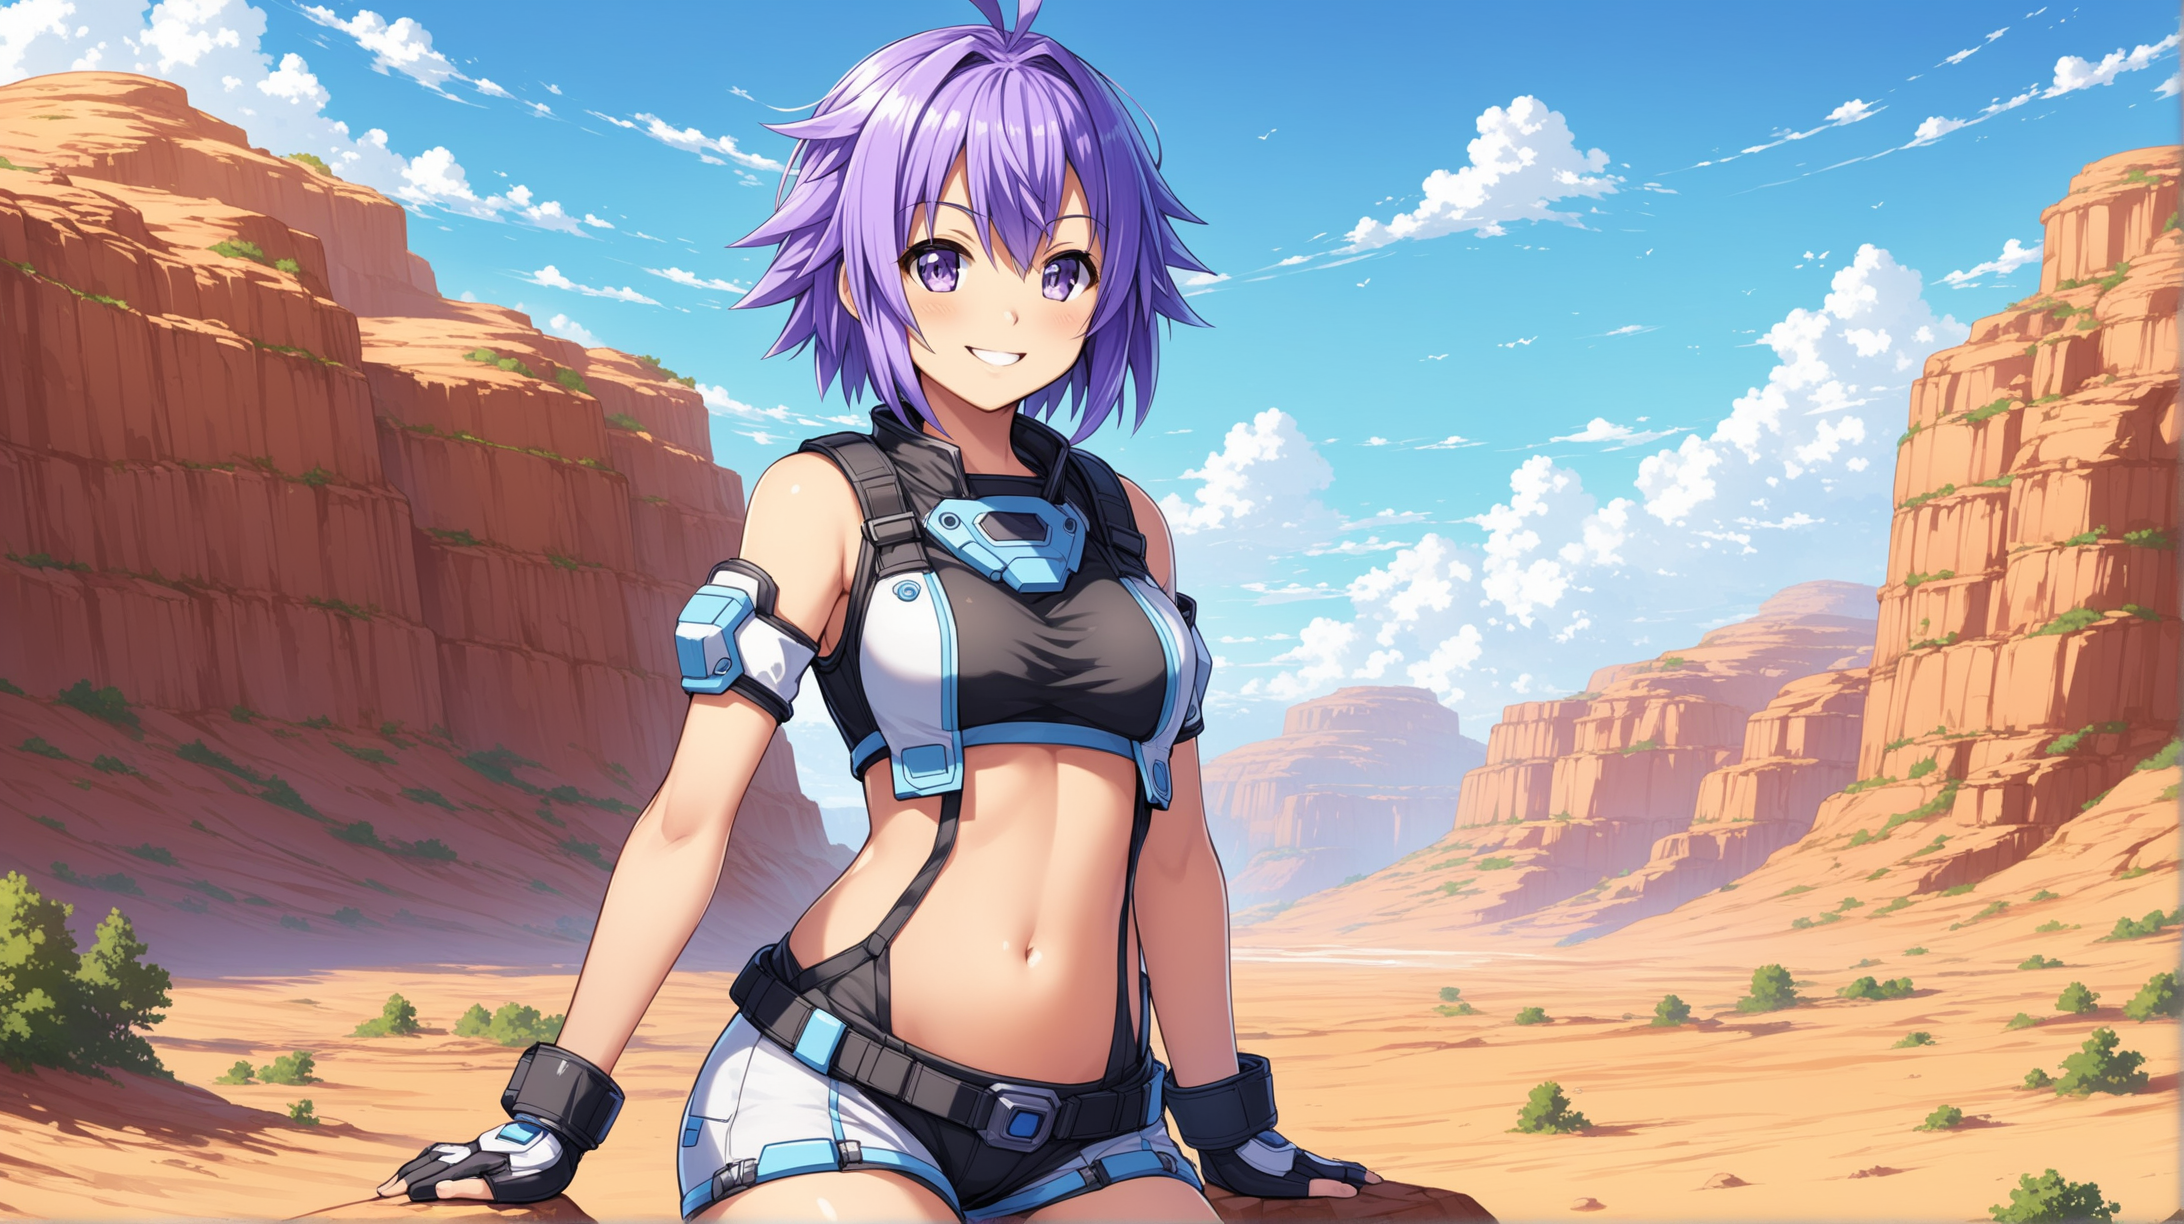 Draw the character Neptunia, short hair, high quality, outdoors, relaxed pose, outfit inspired from the Fallout series, smiling at the viewer